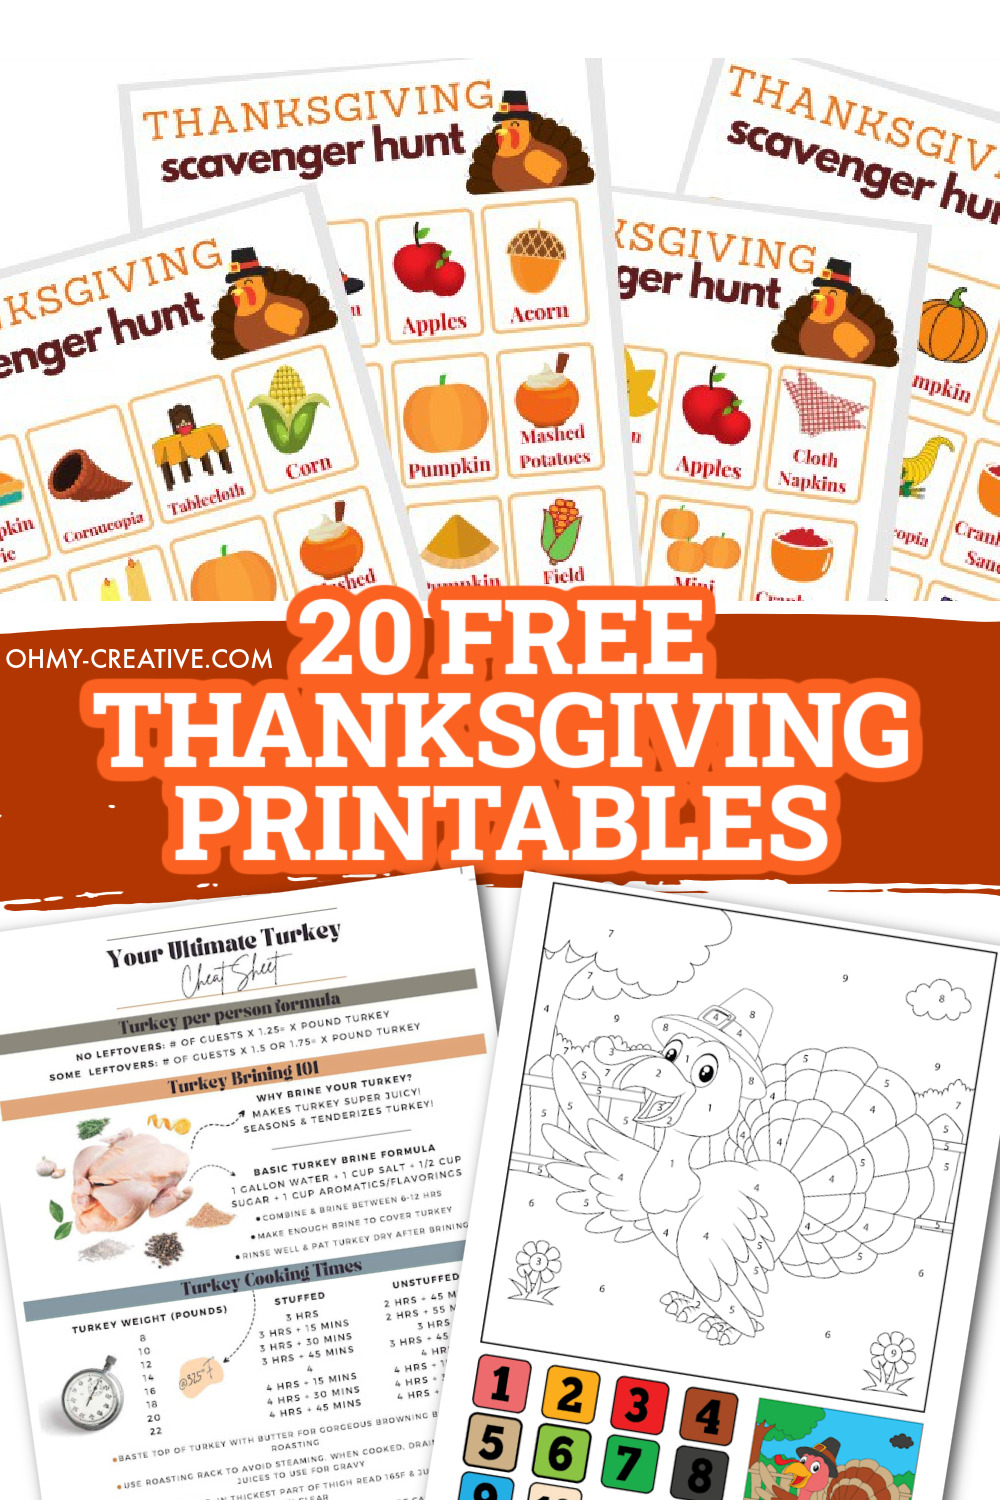 A collage of Free Thanksgiving Printables for kids